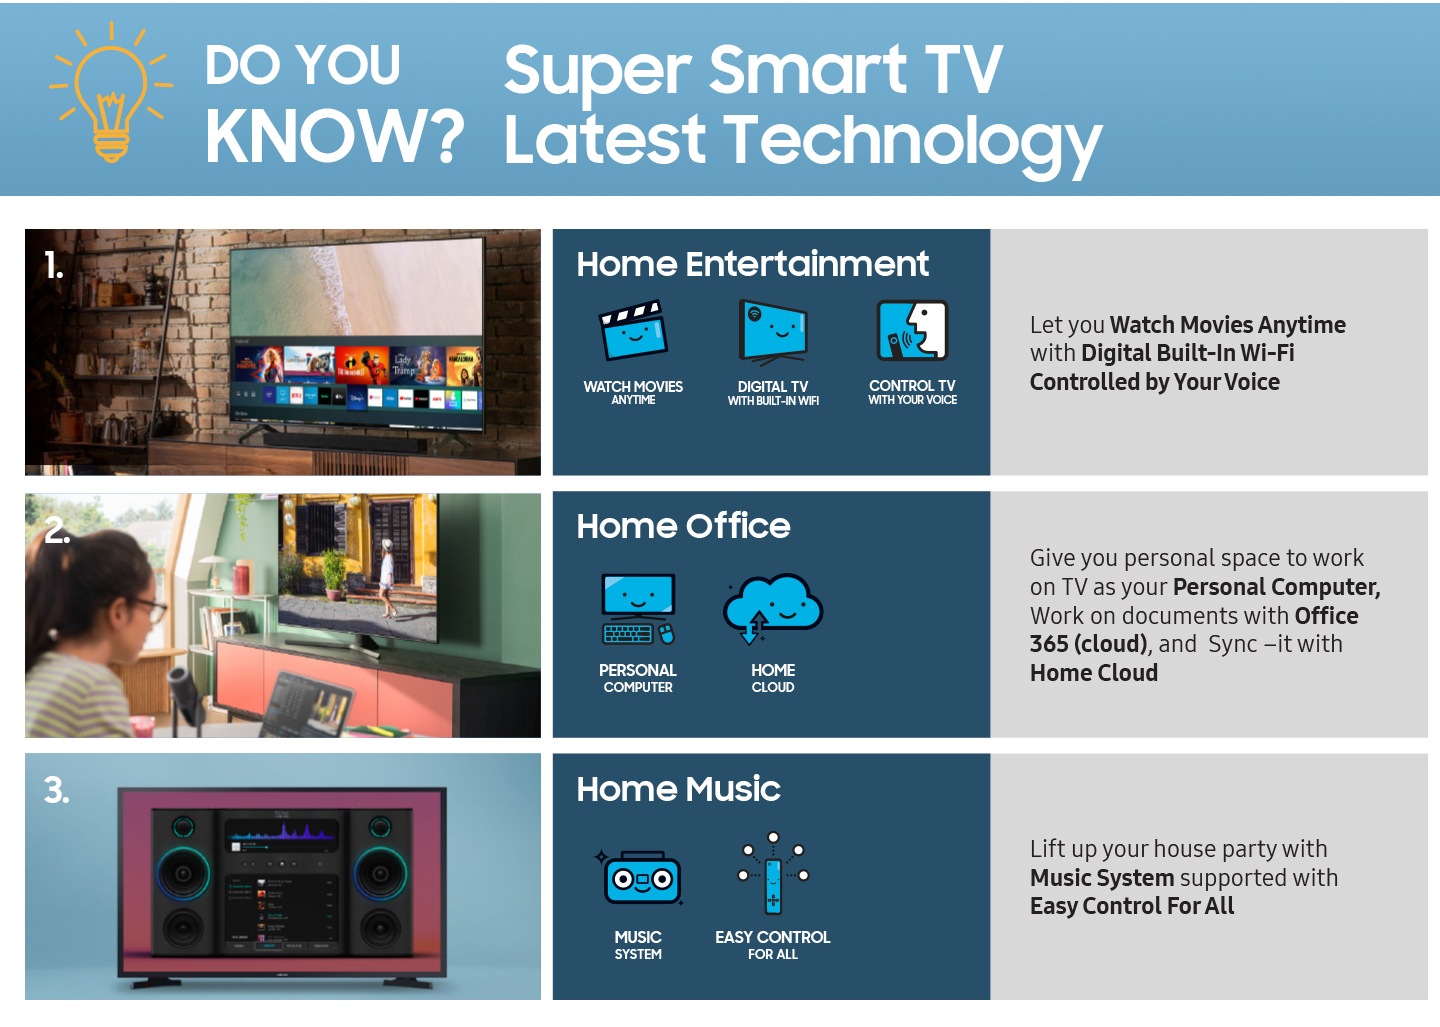 Do you know? Super Smart TV Latest Technology